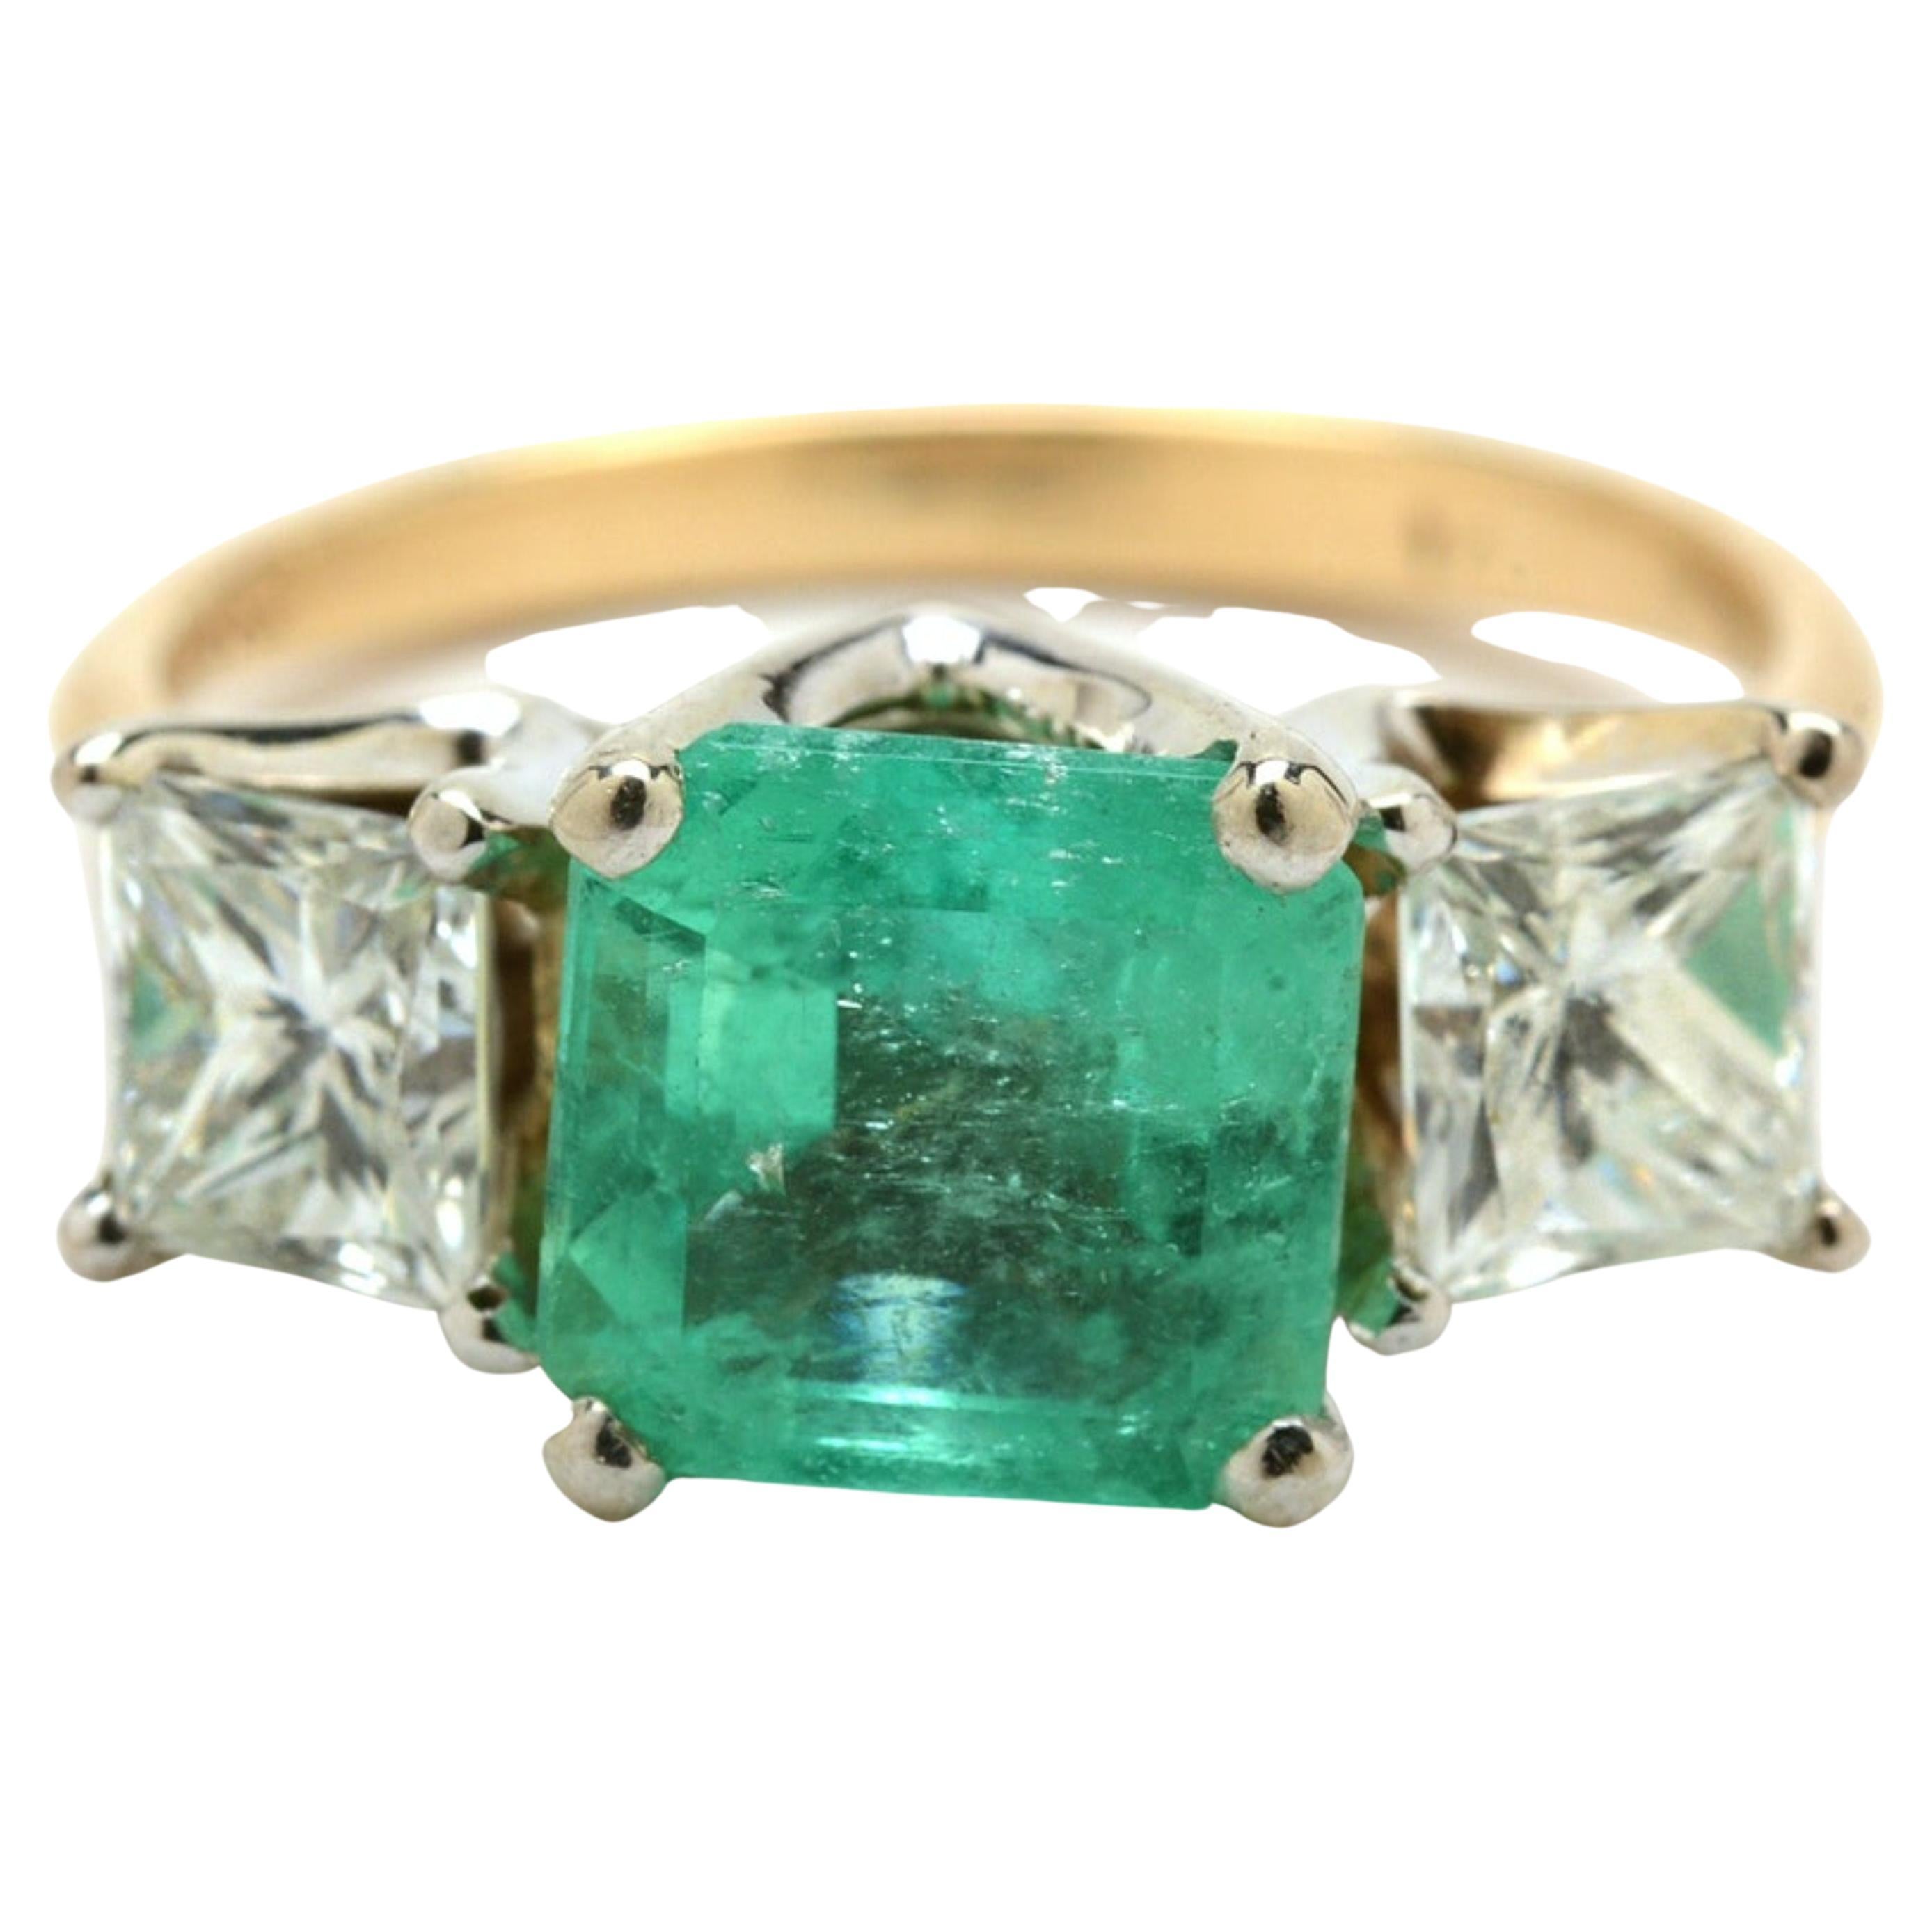 For Sale:  Three Stone Emerald Engagement Rings, Antique Emerald Engagement Ring